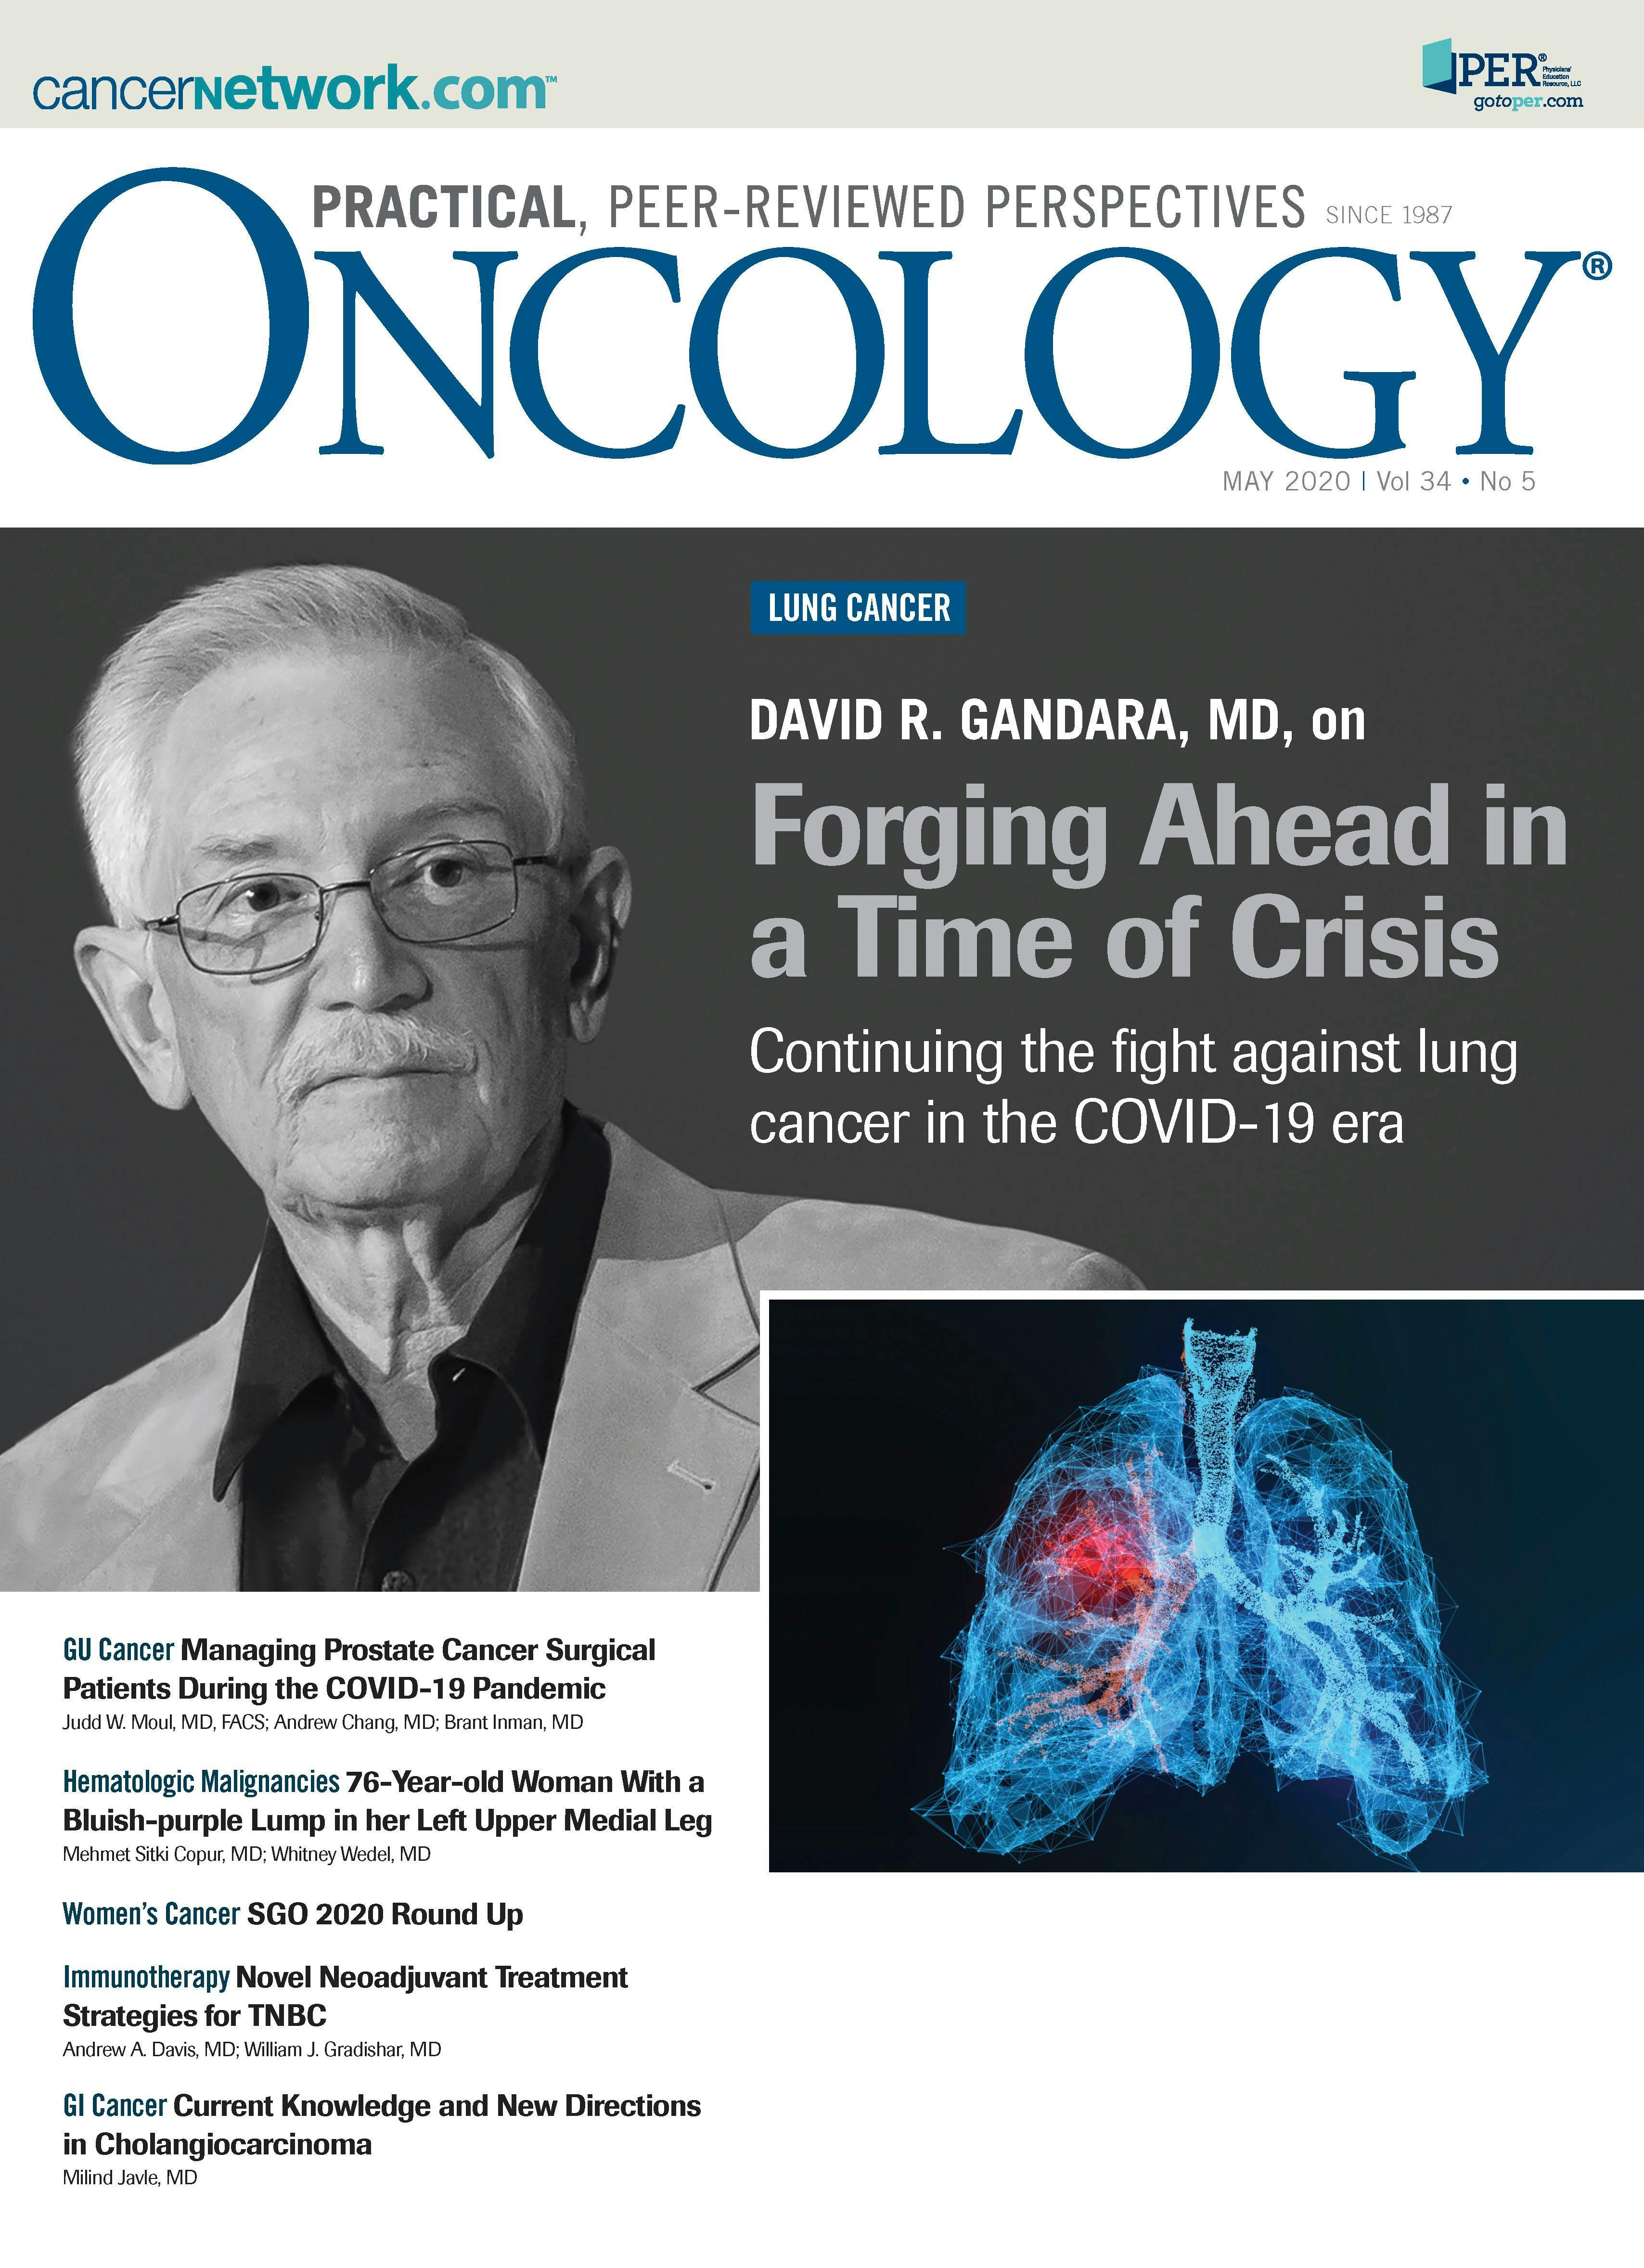 ONCOLOGY Vol 34 Issue 5